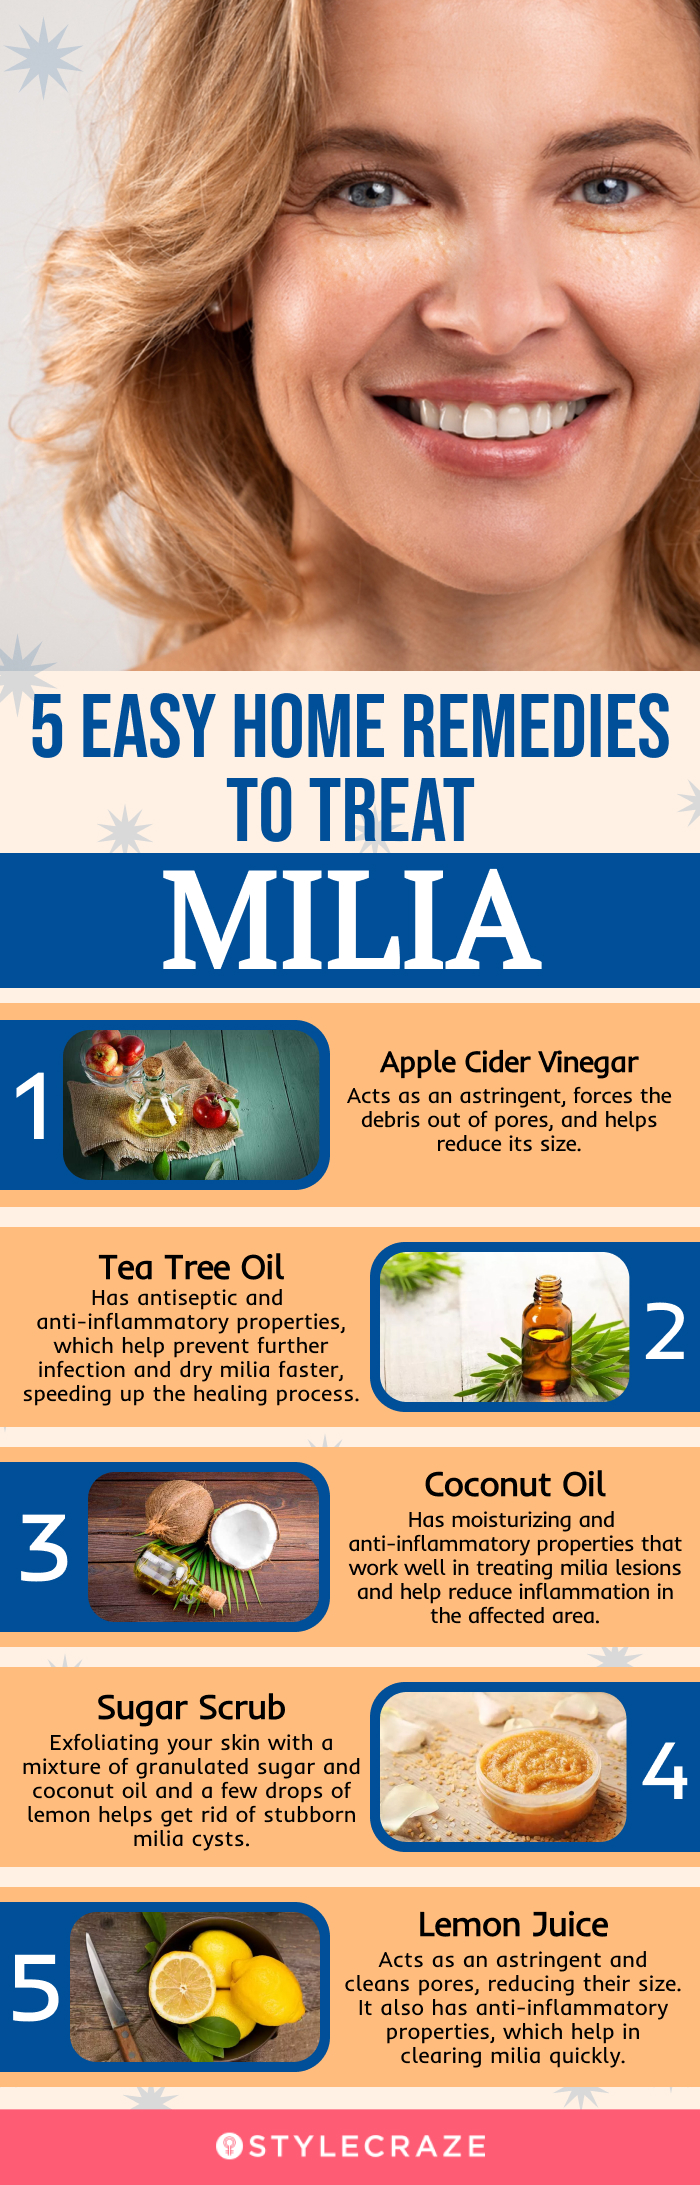 easy home remedies to treat milia (infographic)